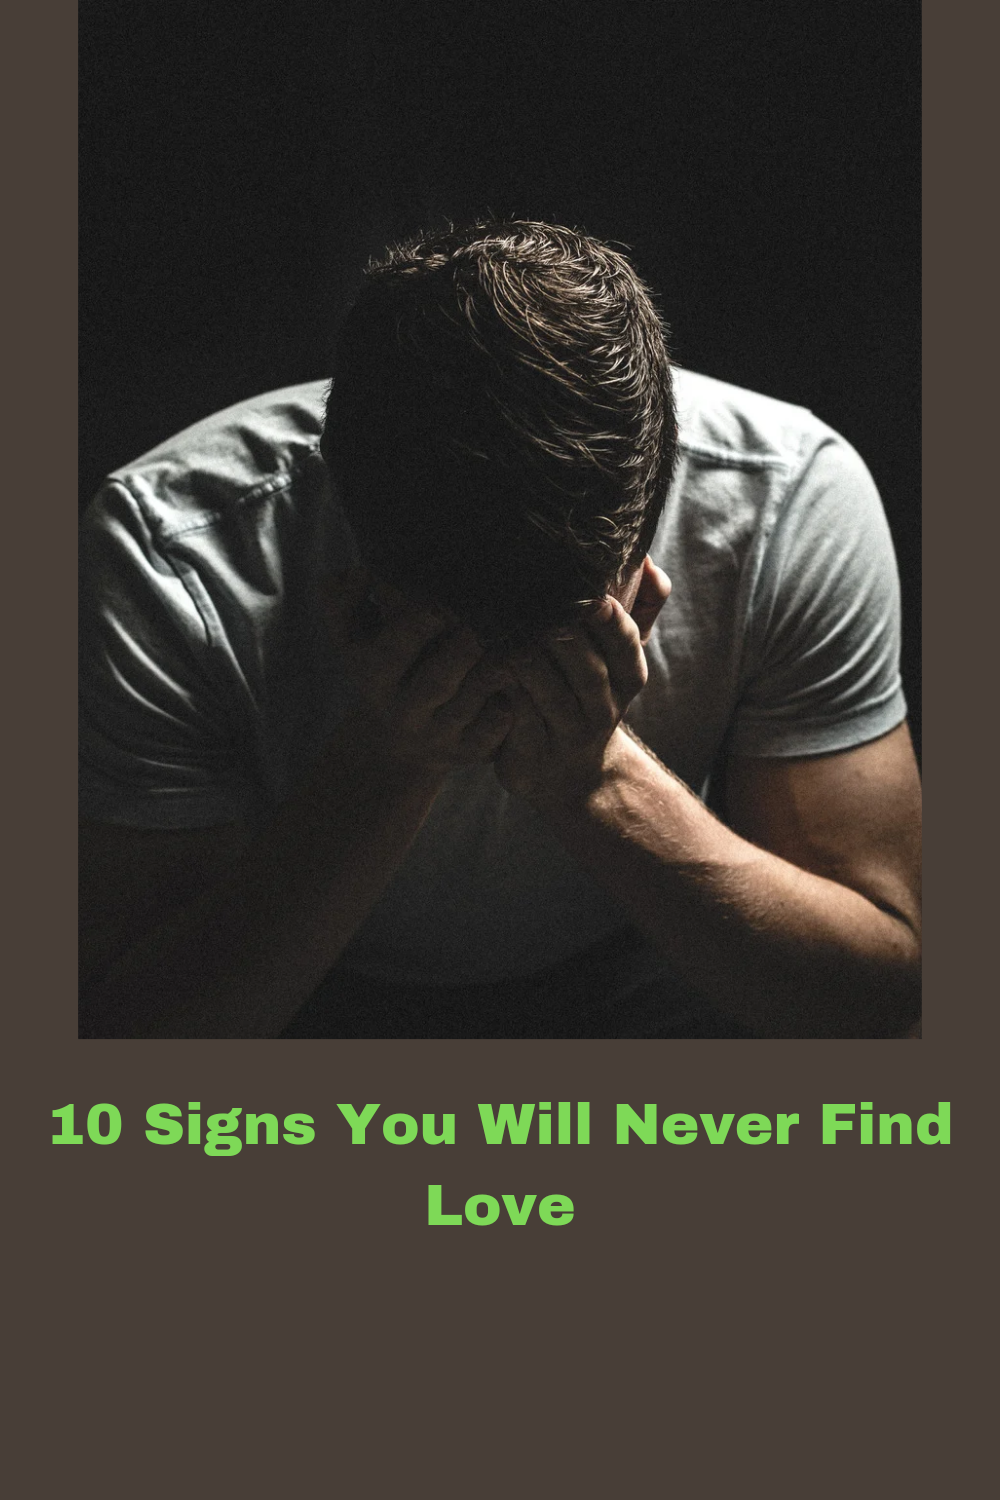 10 Signs You Will Never Find Love